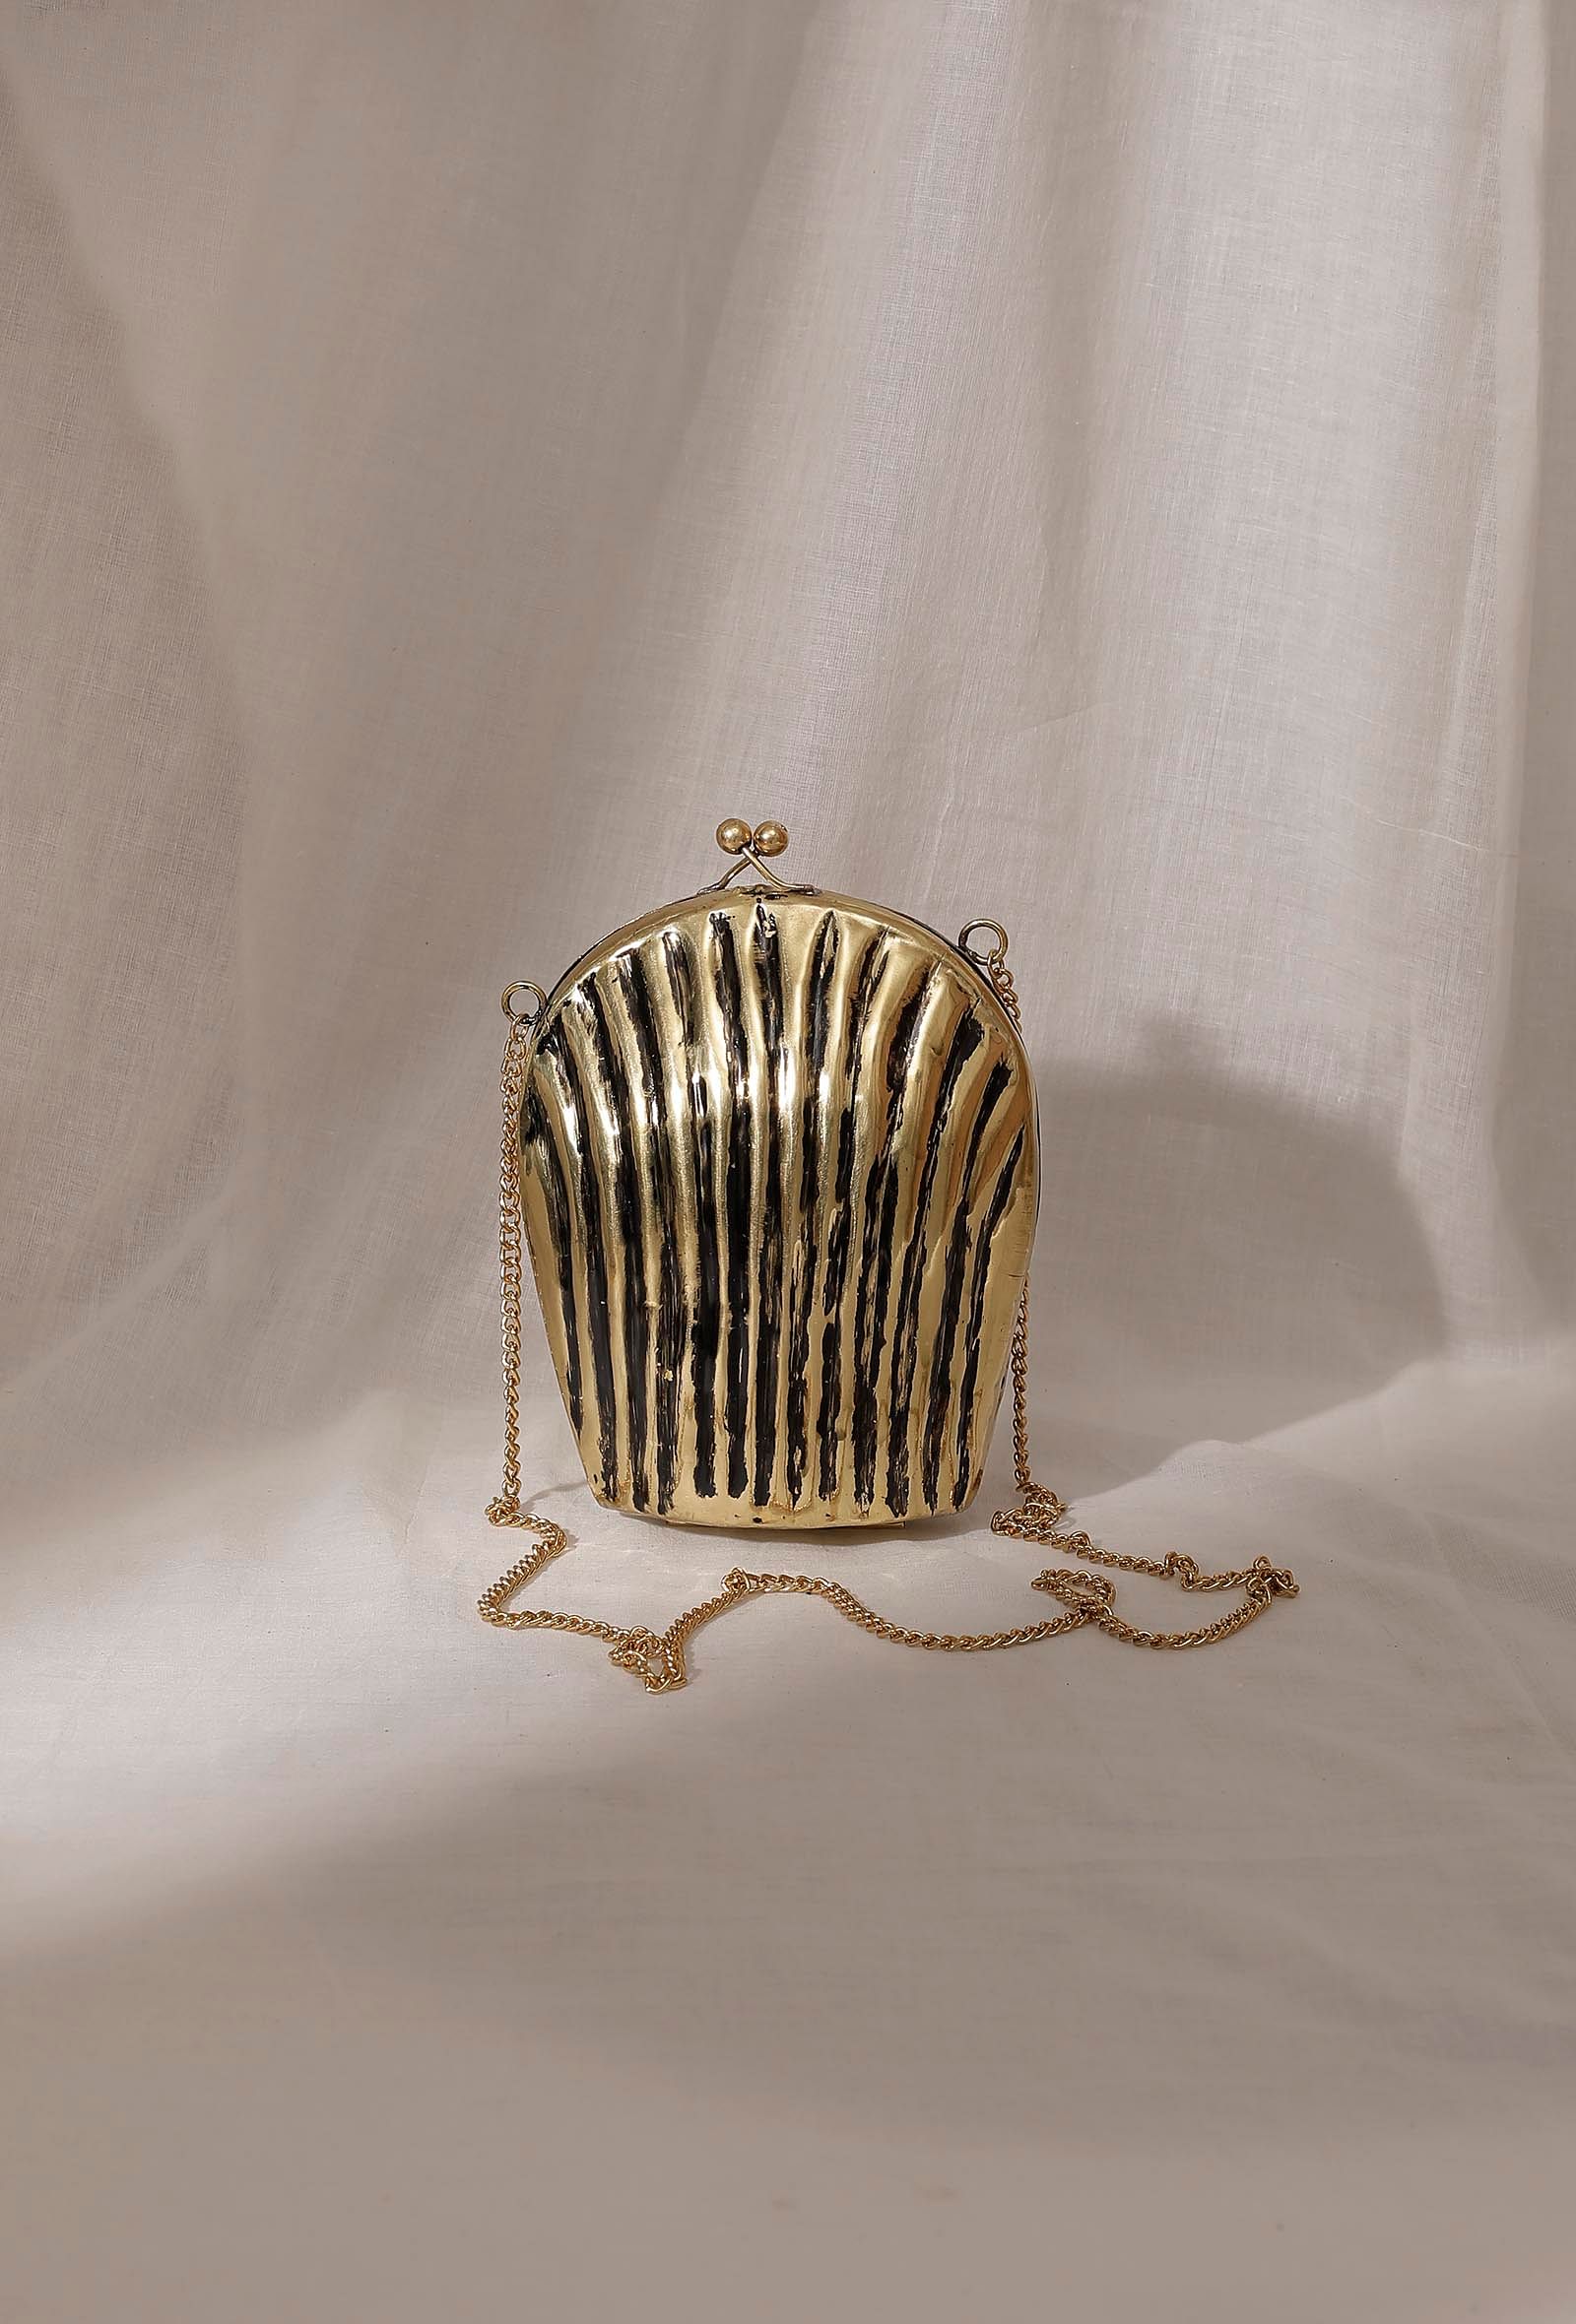 Buy Vintage 70s JUDITH LEIBER Seashell MINAUDIERE Purse Bag Shoulder Bag  Rare Shell Purse Same as in the Met Collection Online in India - Etsy